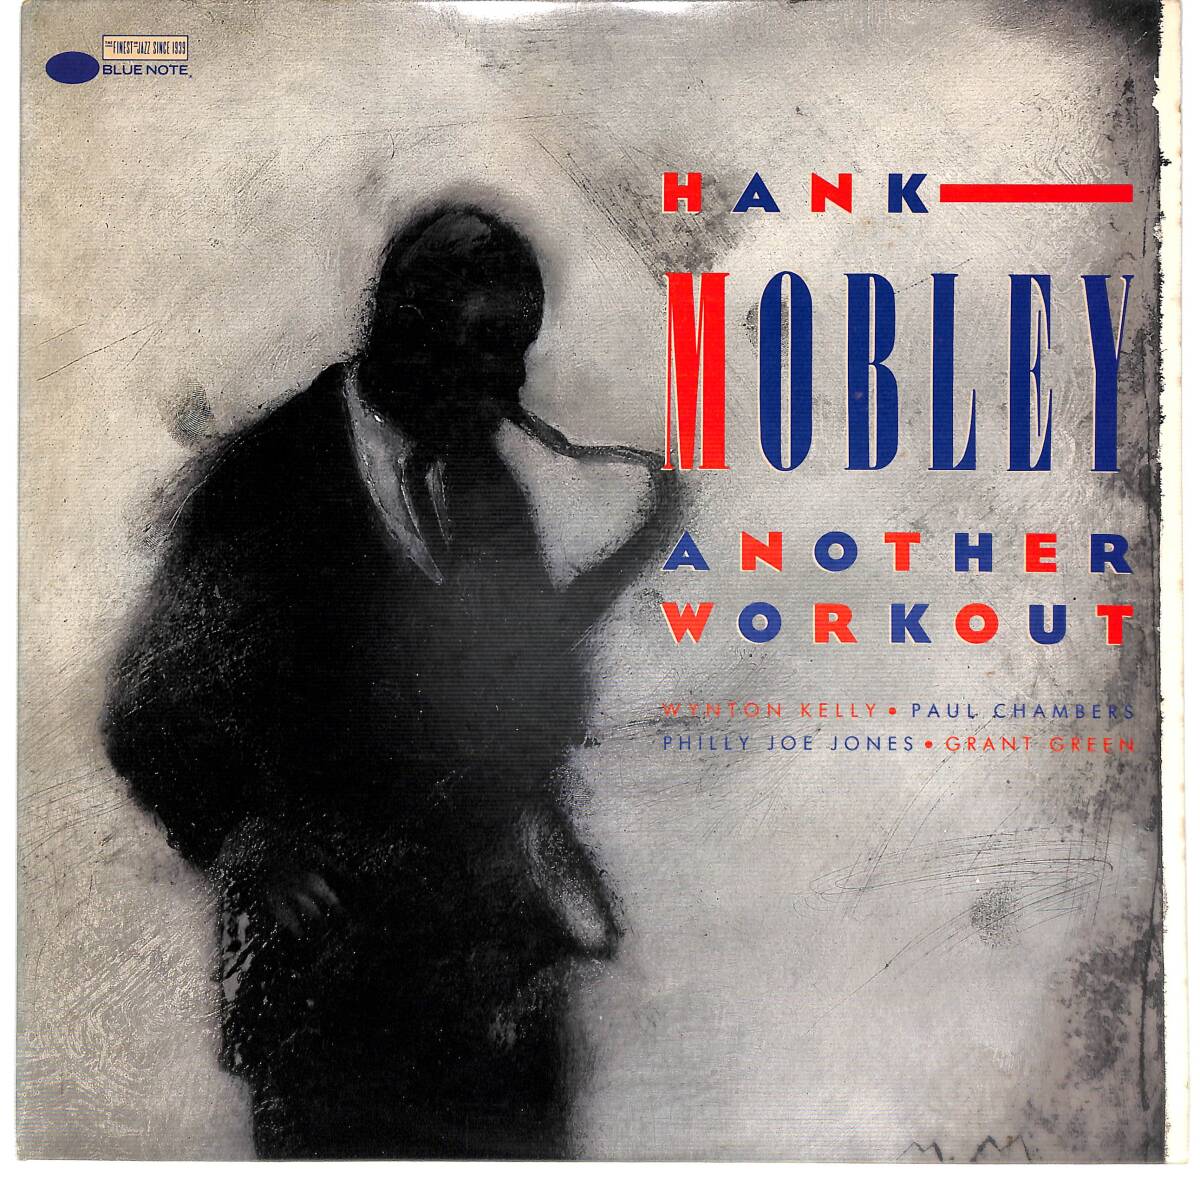 e3364/LP/米/BLUE NOTE/85年盤/SRC刻印/Hank Mobley/Another Workout_画像1